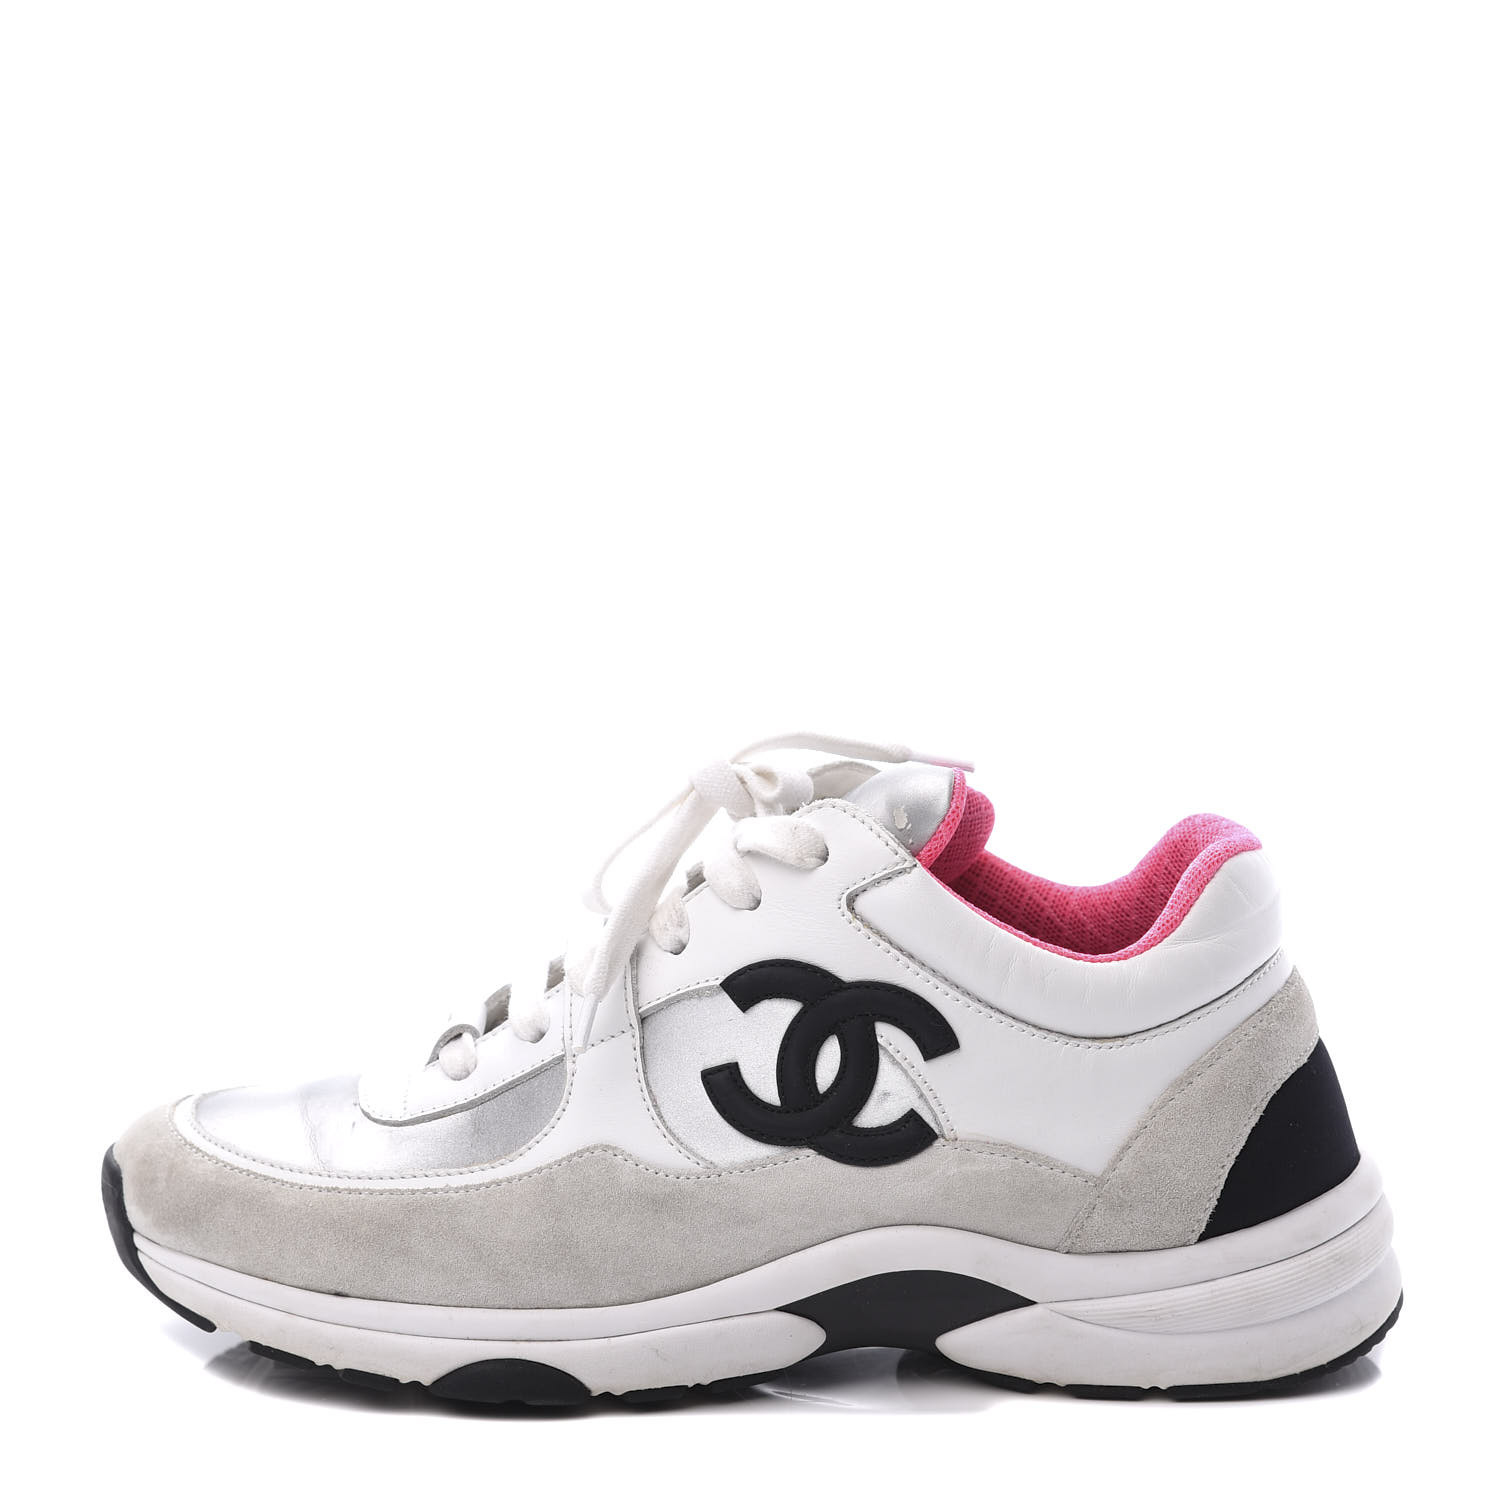 chanel sneakers 38